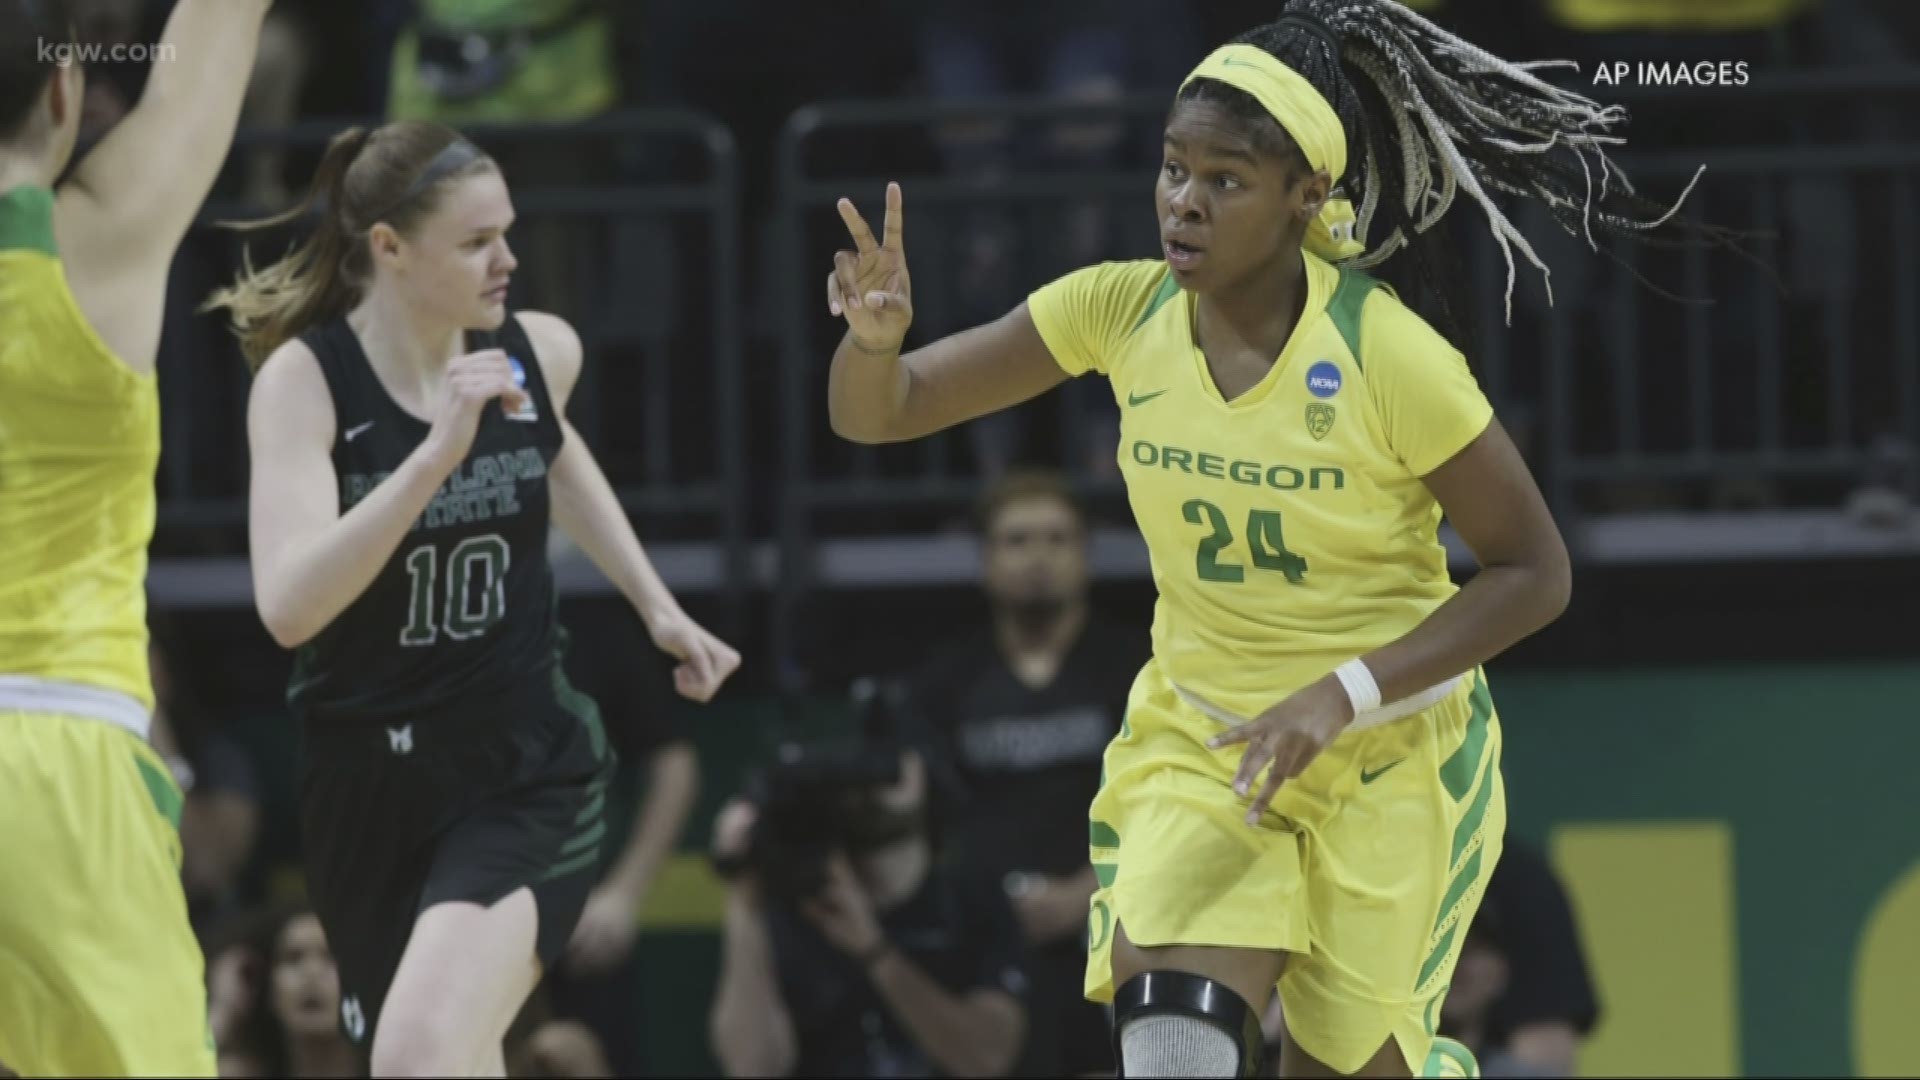 The Oregon women play Indiana in Eugene in the second round of the NCAA tournament